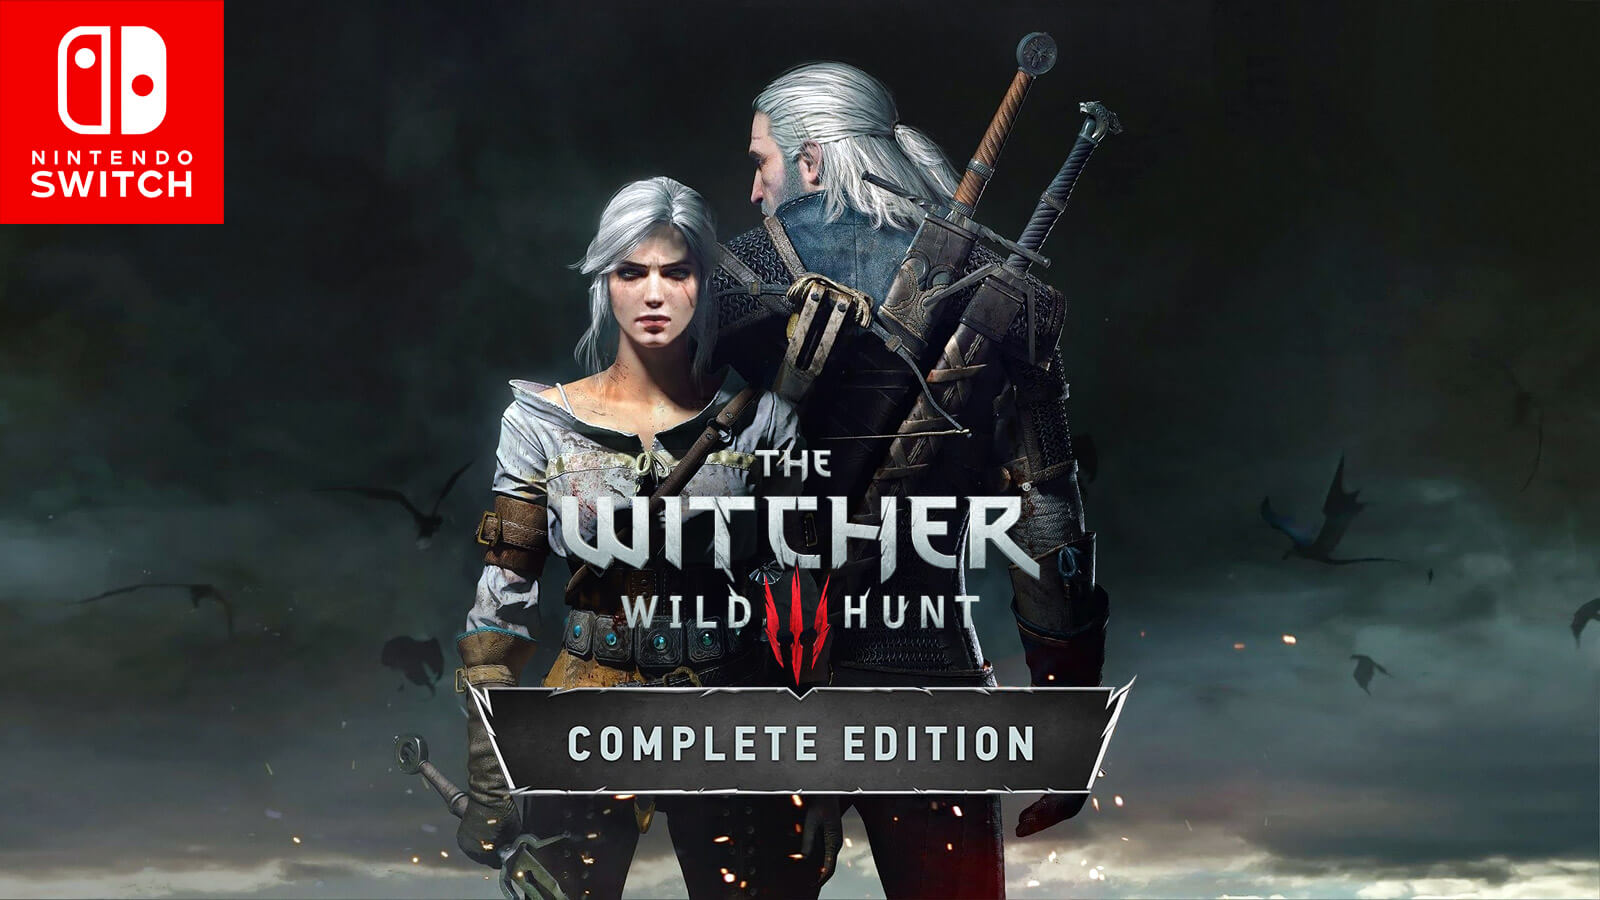 THE WITCHER 3: WILD HUNT – COMPLETE EDITION